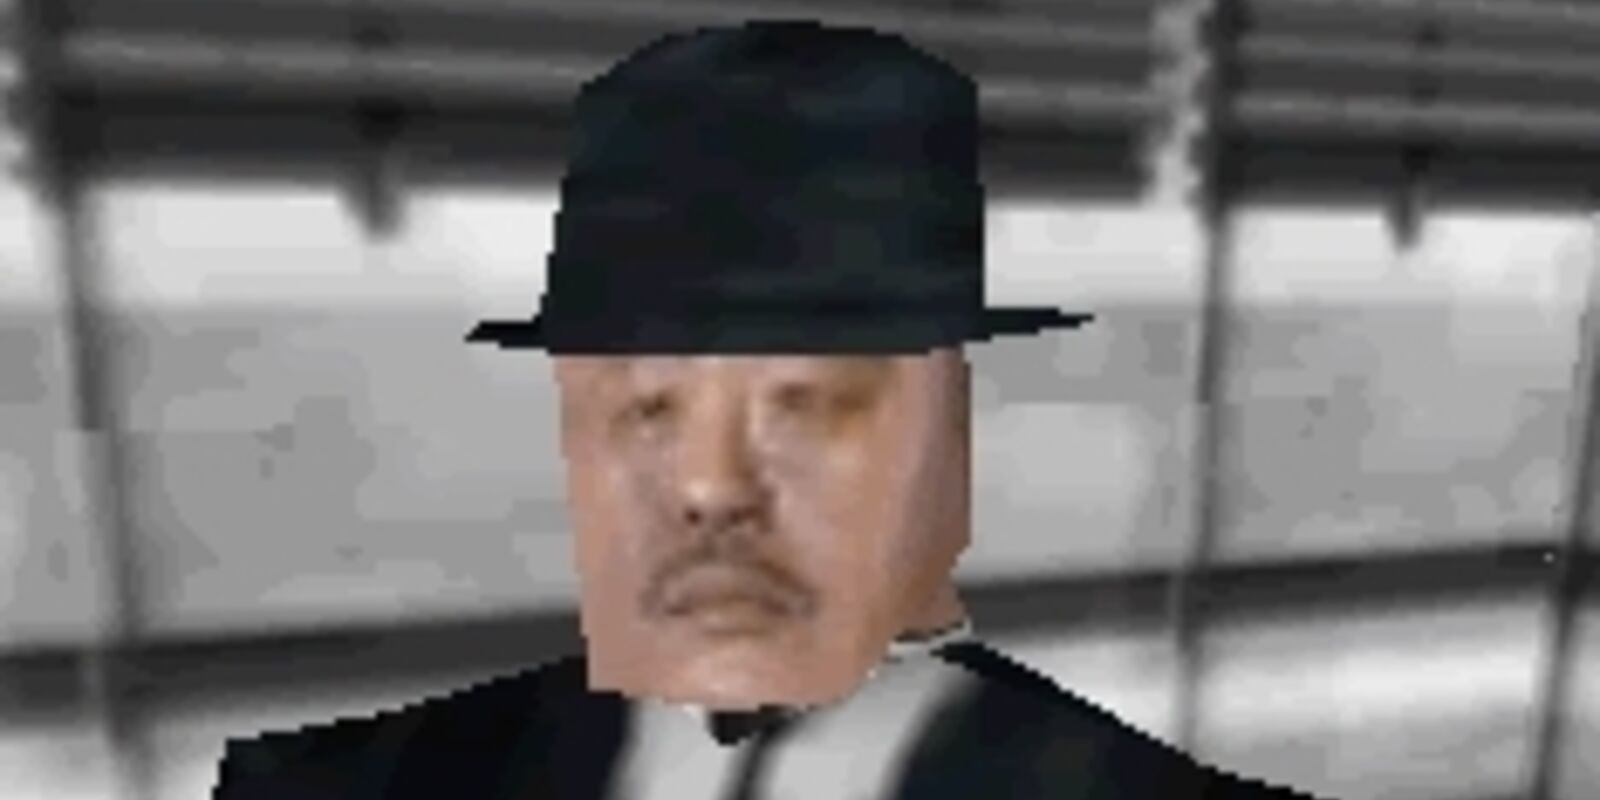 A screenshot of the character Oddjob from the game Goldeneye for the N64